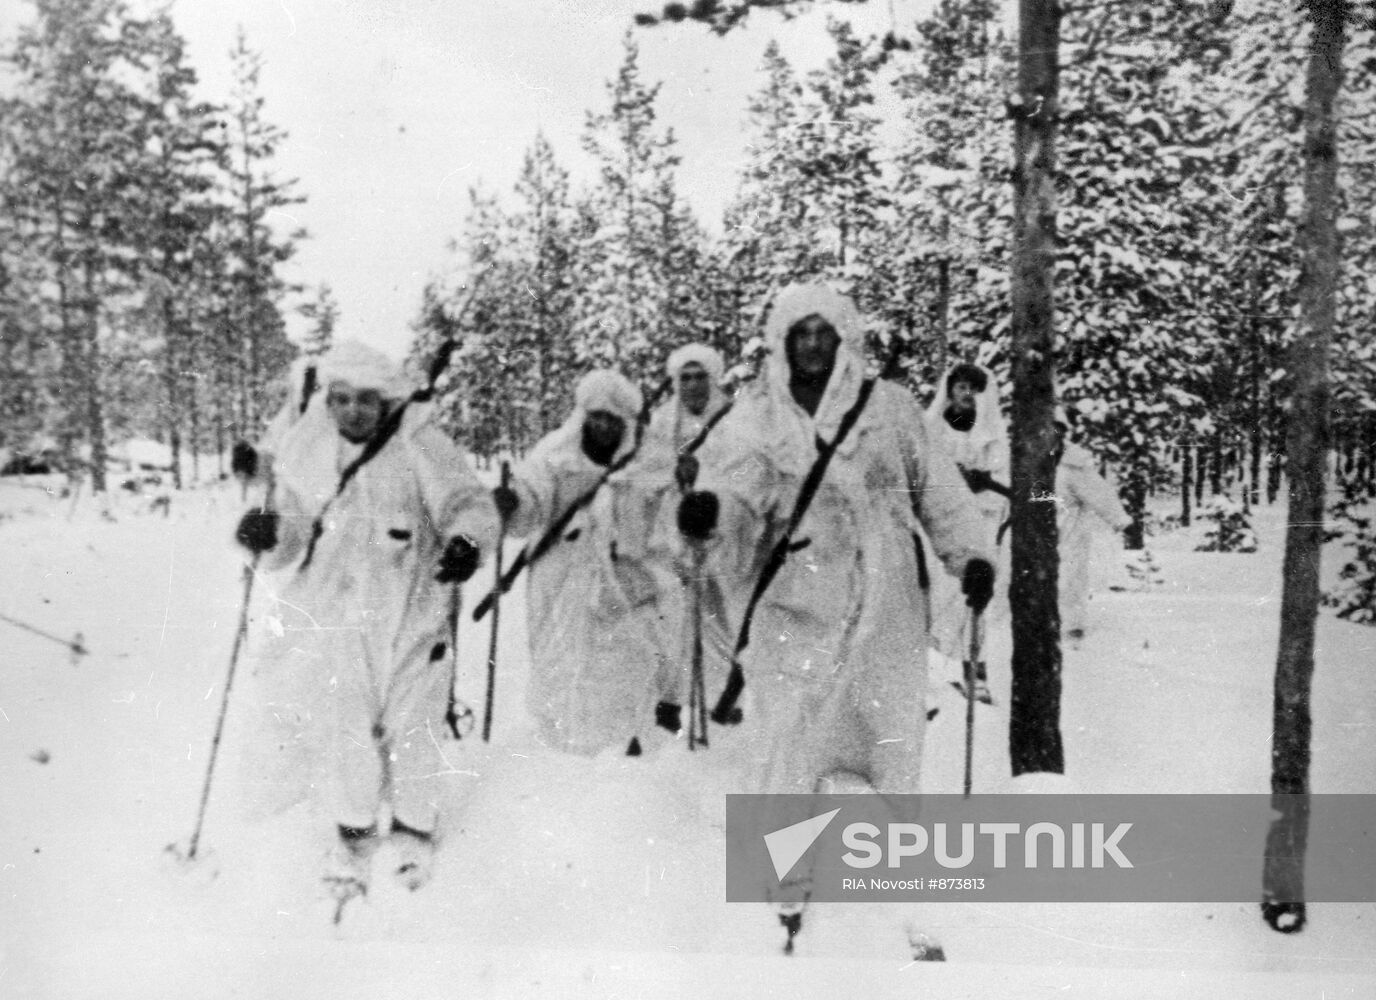 Soldiers of a ski battalion on the march